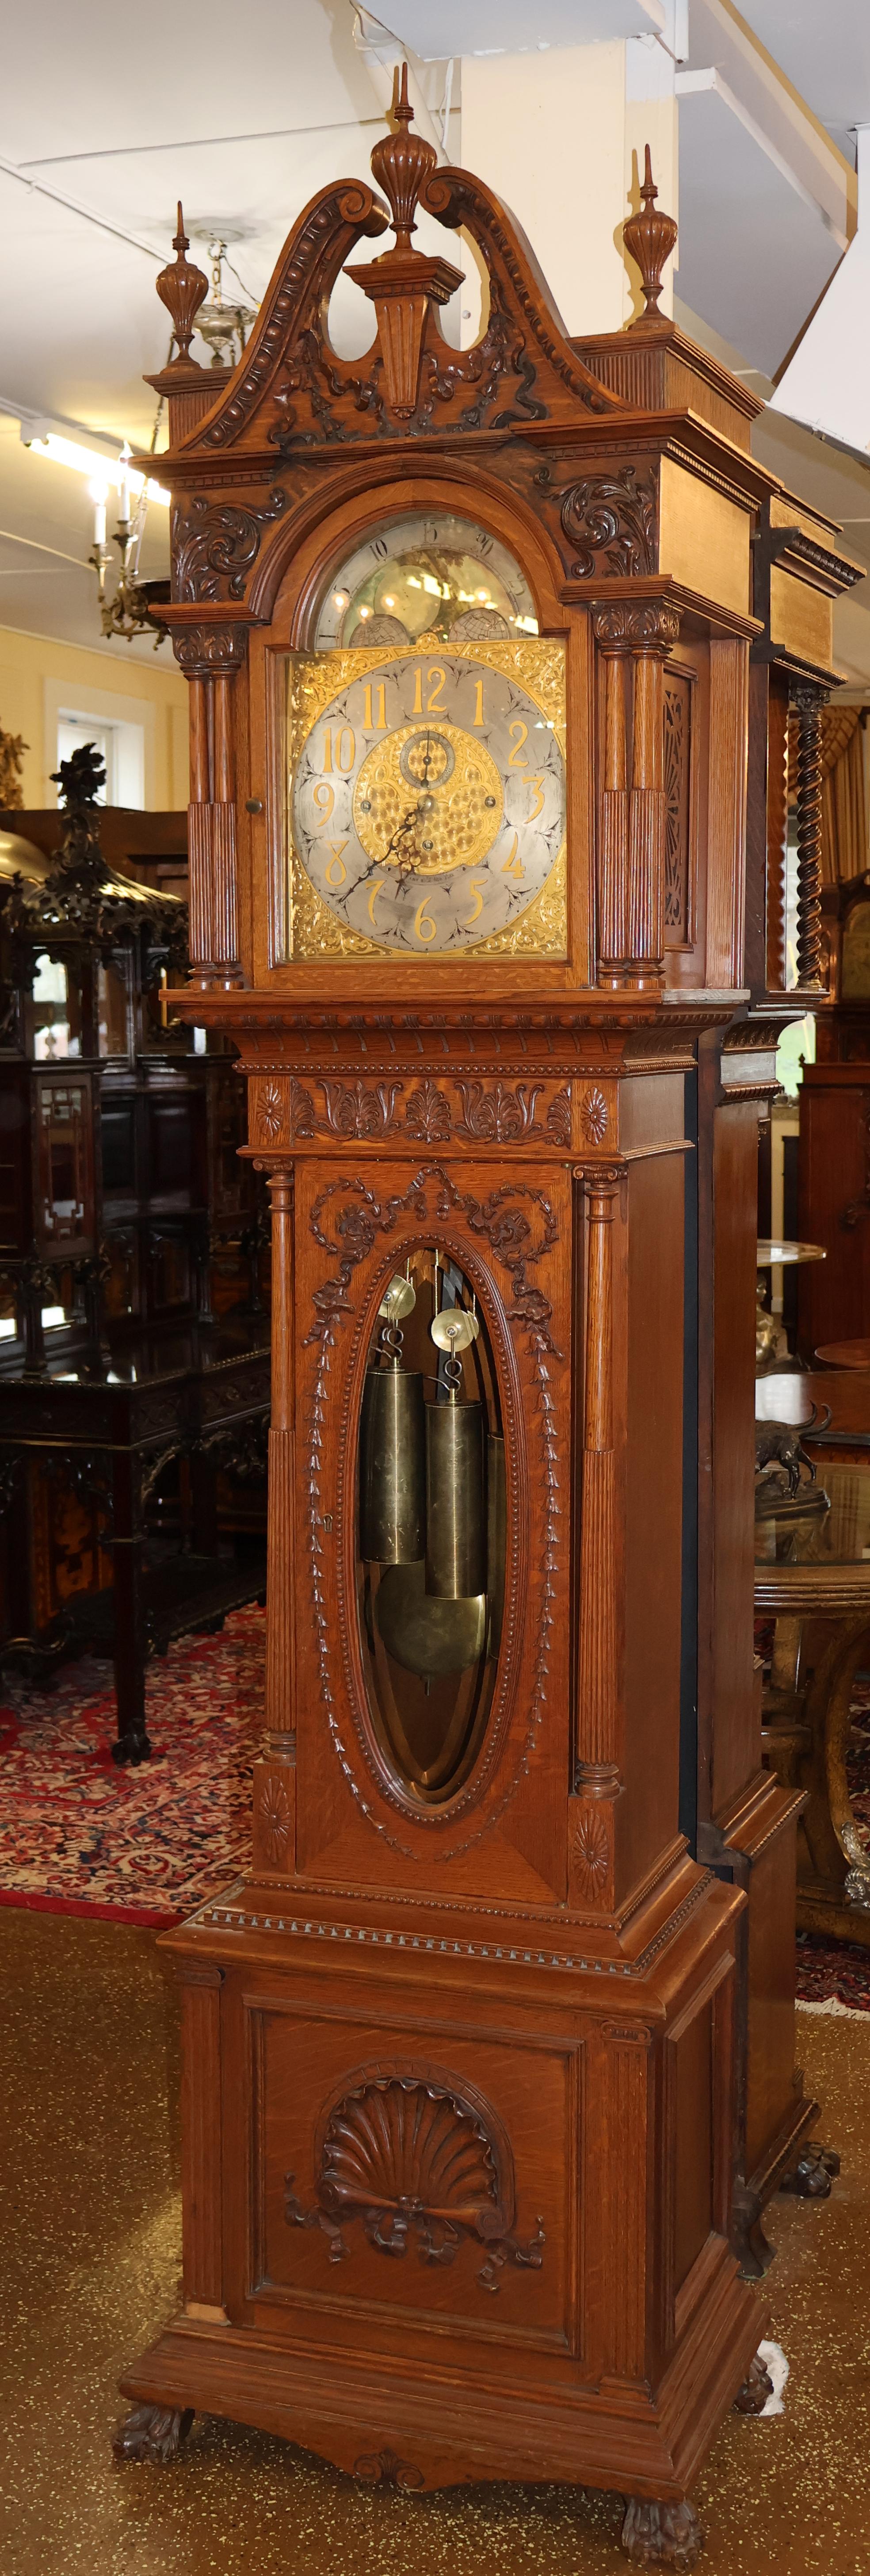 19th Century Tiffany & CO Oak 5 Musical 5 Gong Tall Case Grandfather Clock

Dimensions : 104